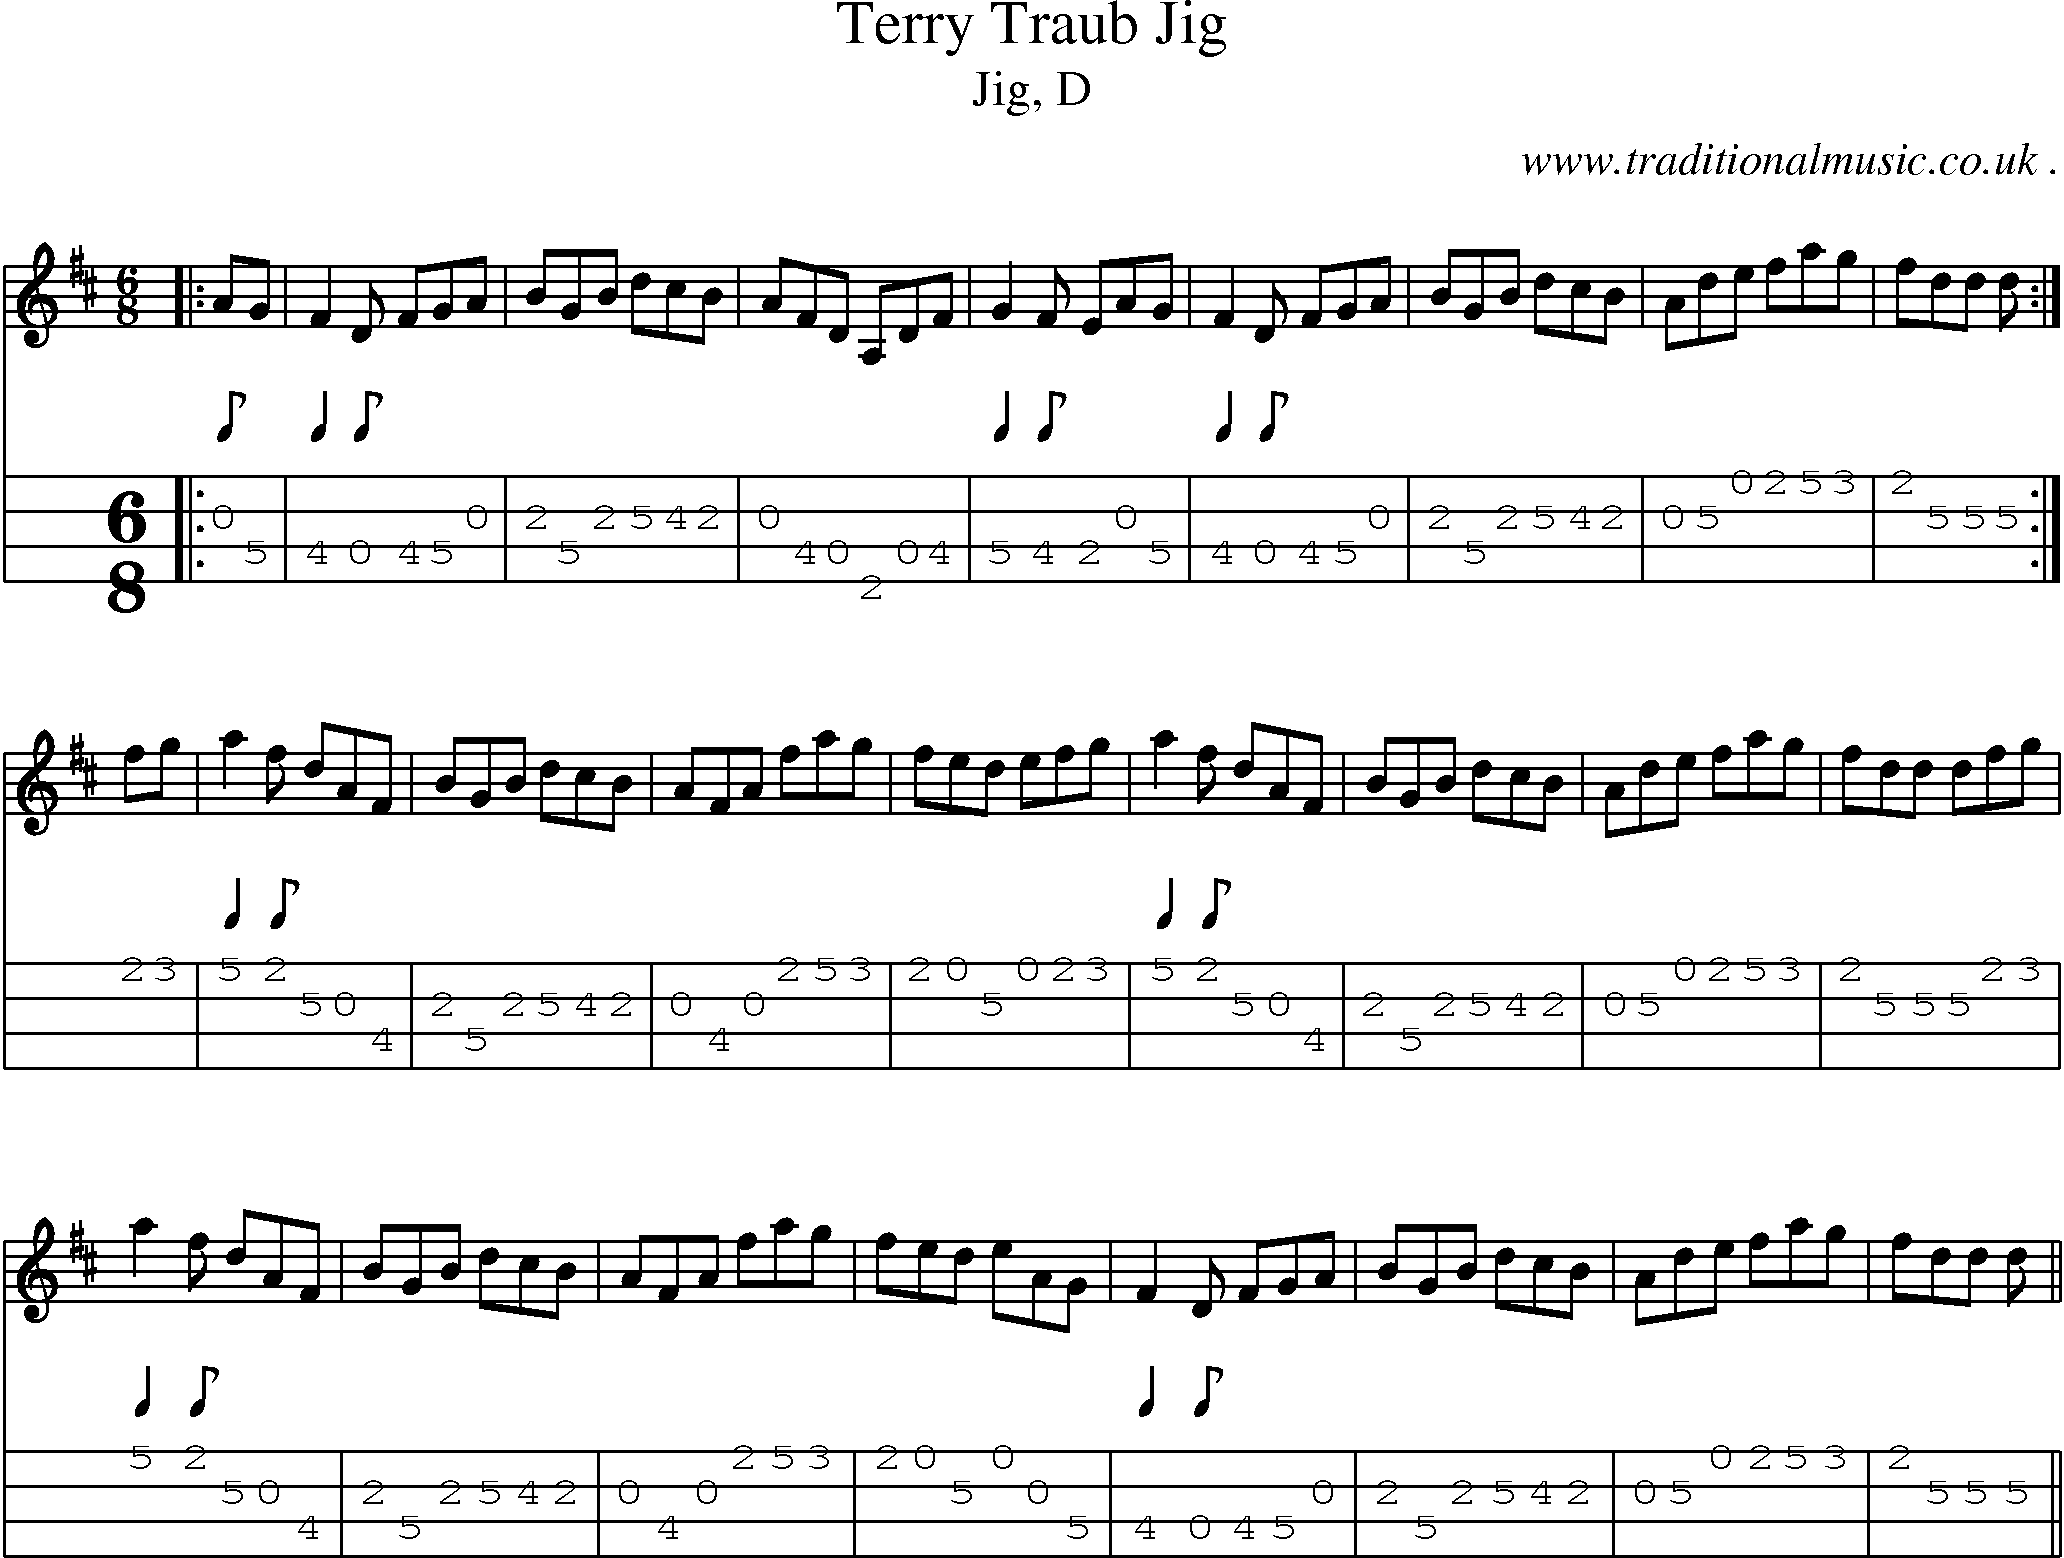 Sheet-music  score, Chords and Mandolin Tabs for Terry Traub Jig